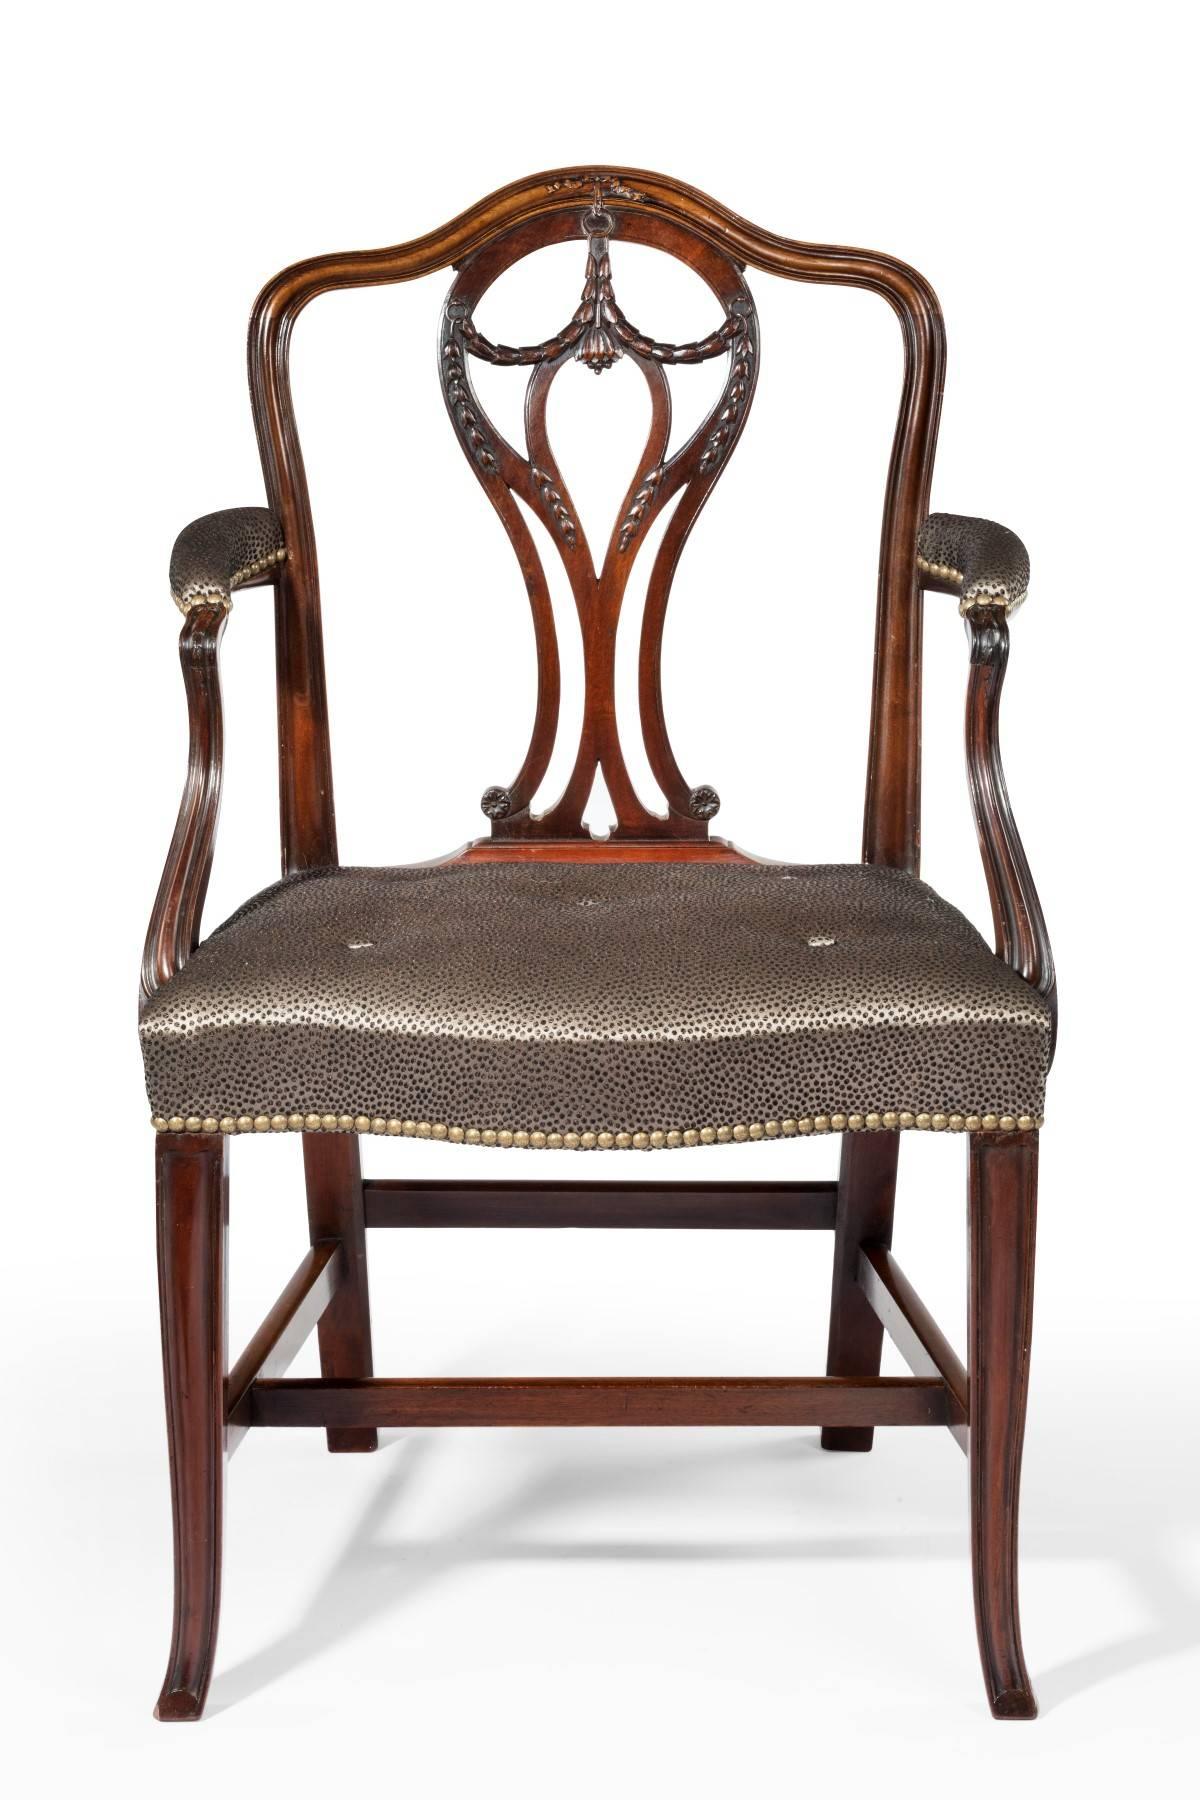 Dating from the 18th century Hepplewhite period and made from best quality Cuban mahogany, the chair has good carved decoration to the back and arms. The molded legs kick out at the bottom and the chair is a very good color. It has been recently